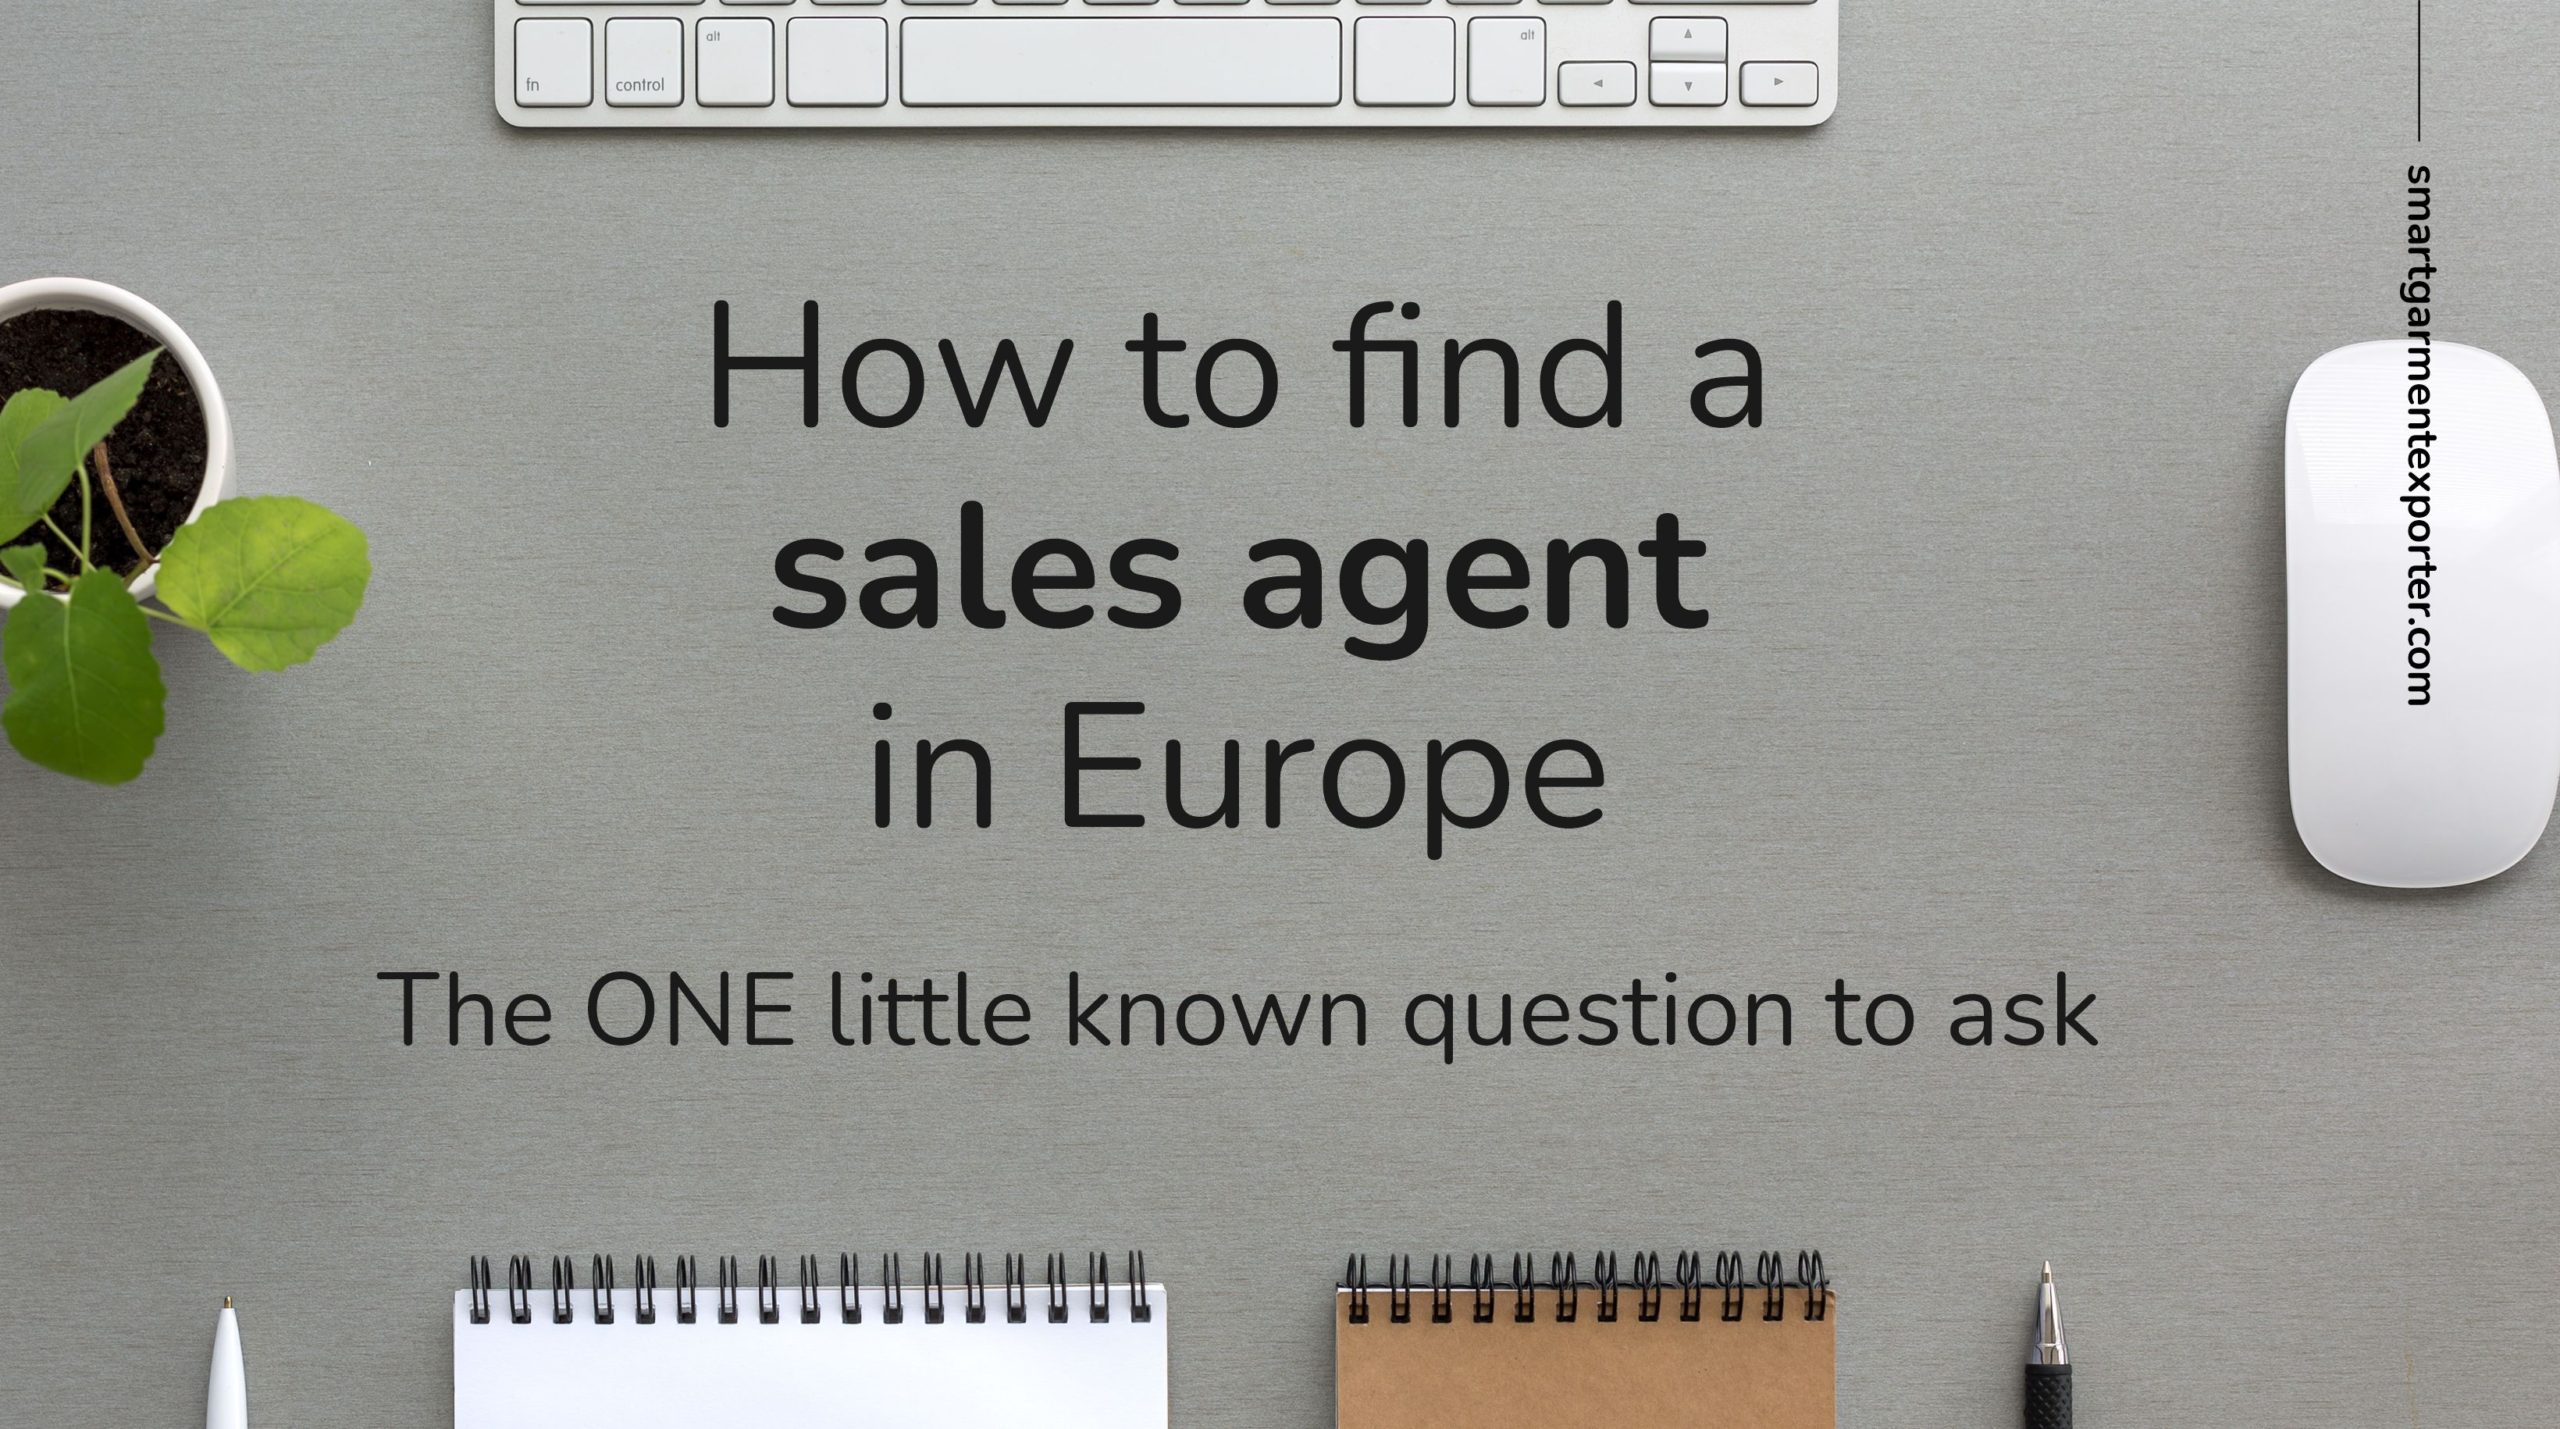 Plan to hire a sales agent in Europe? The ONE little known question to ask